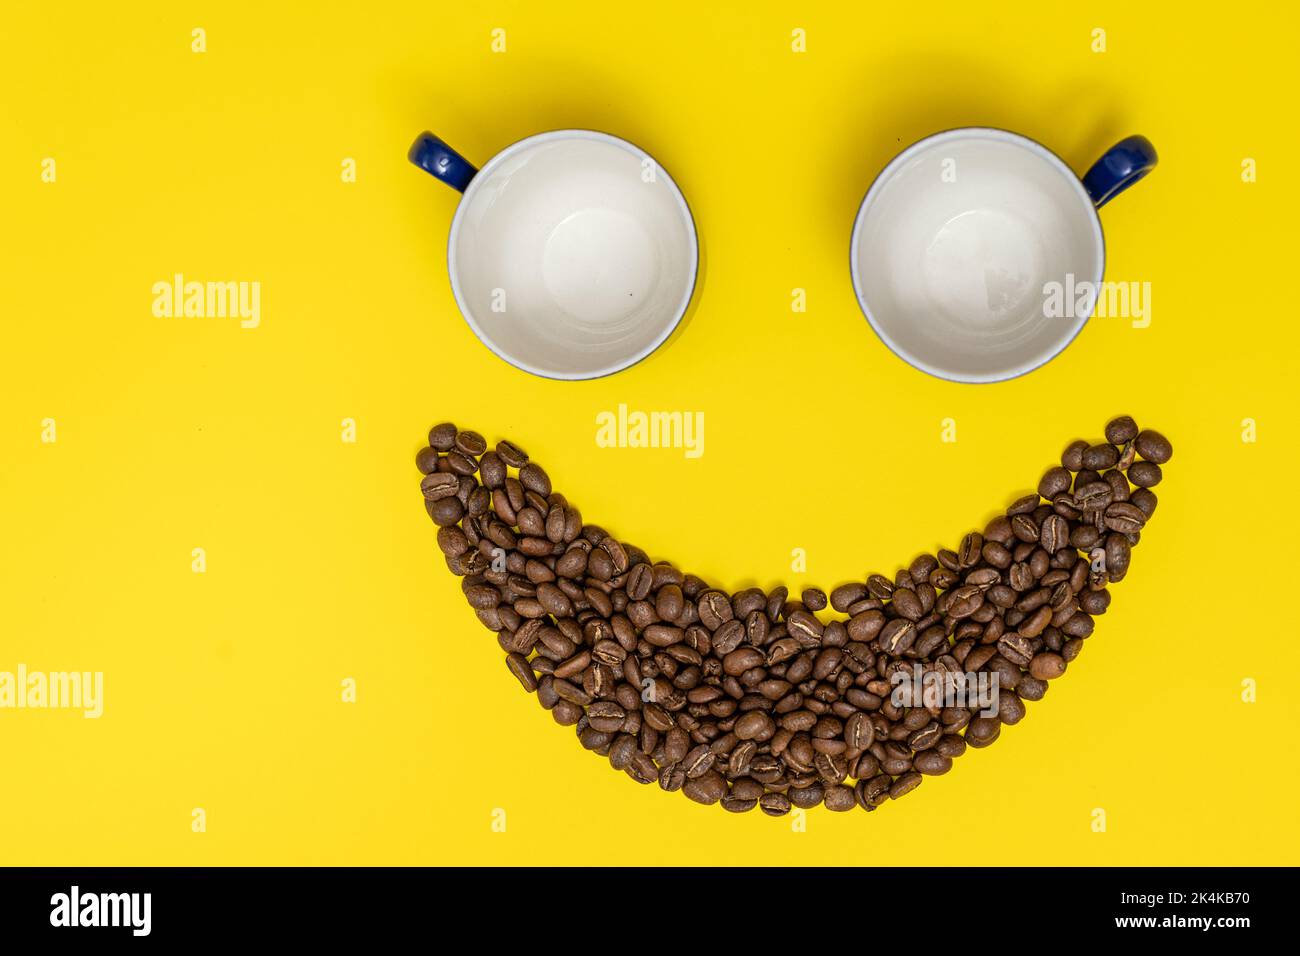 Happy emoticon made of coffee beans on a yellow background. Stock Photo